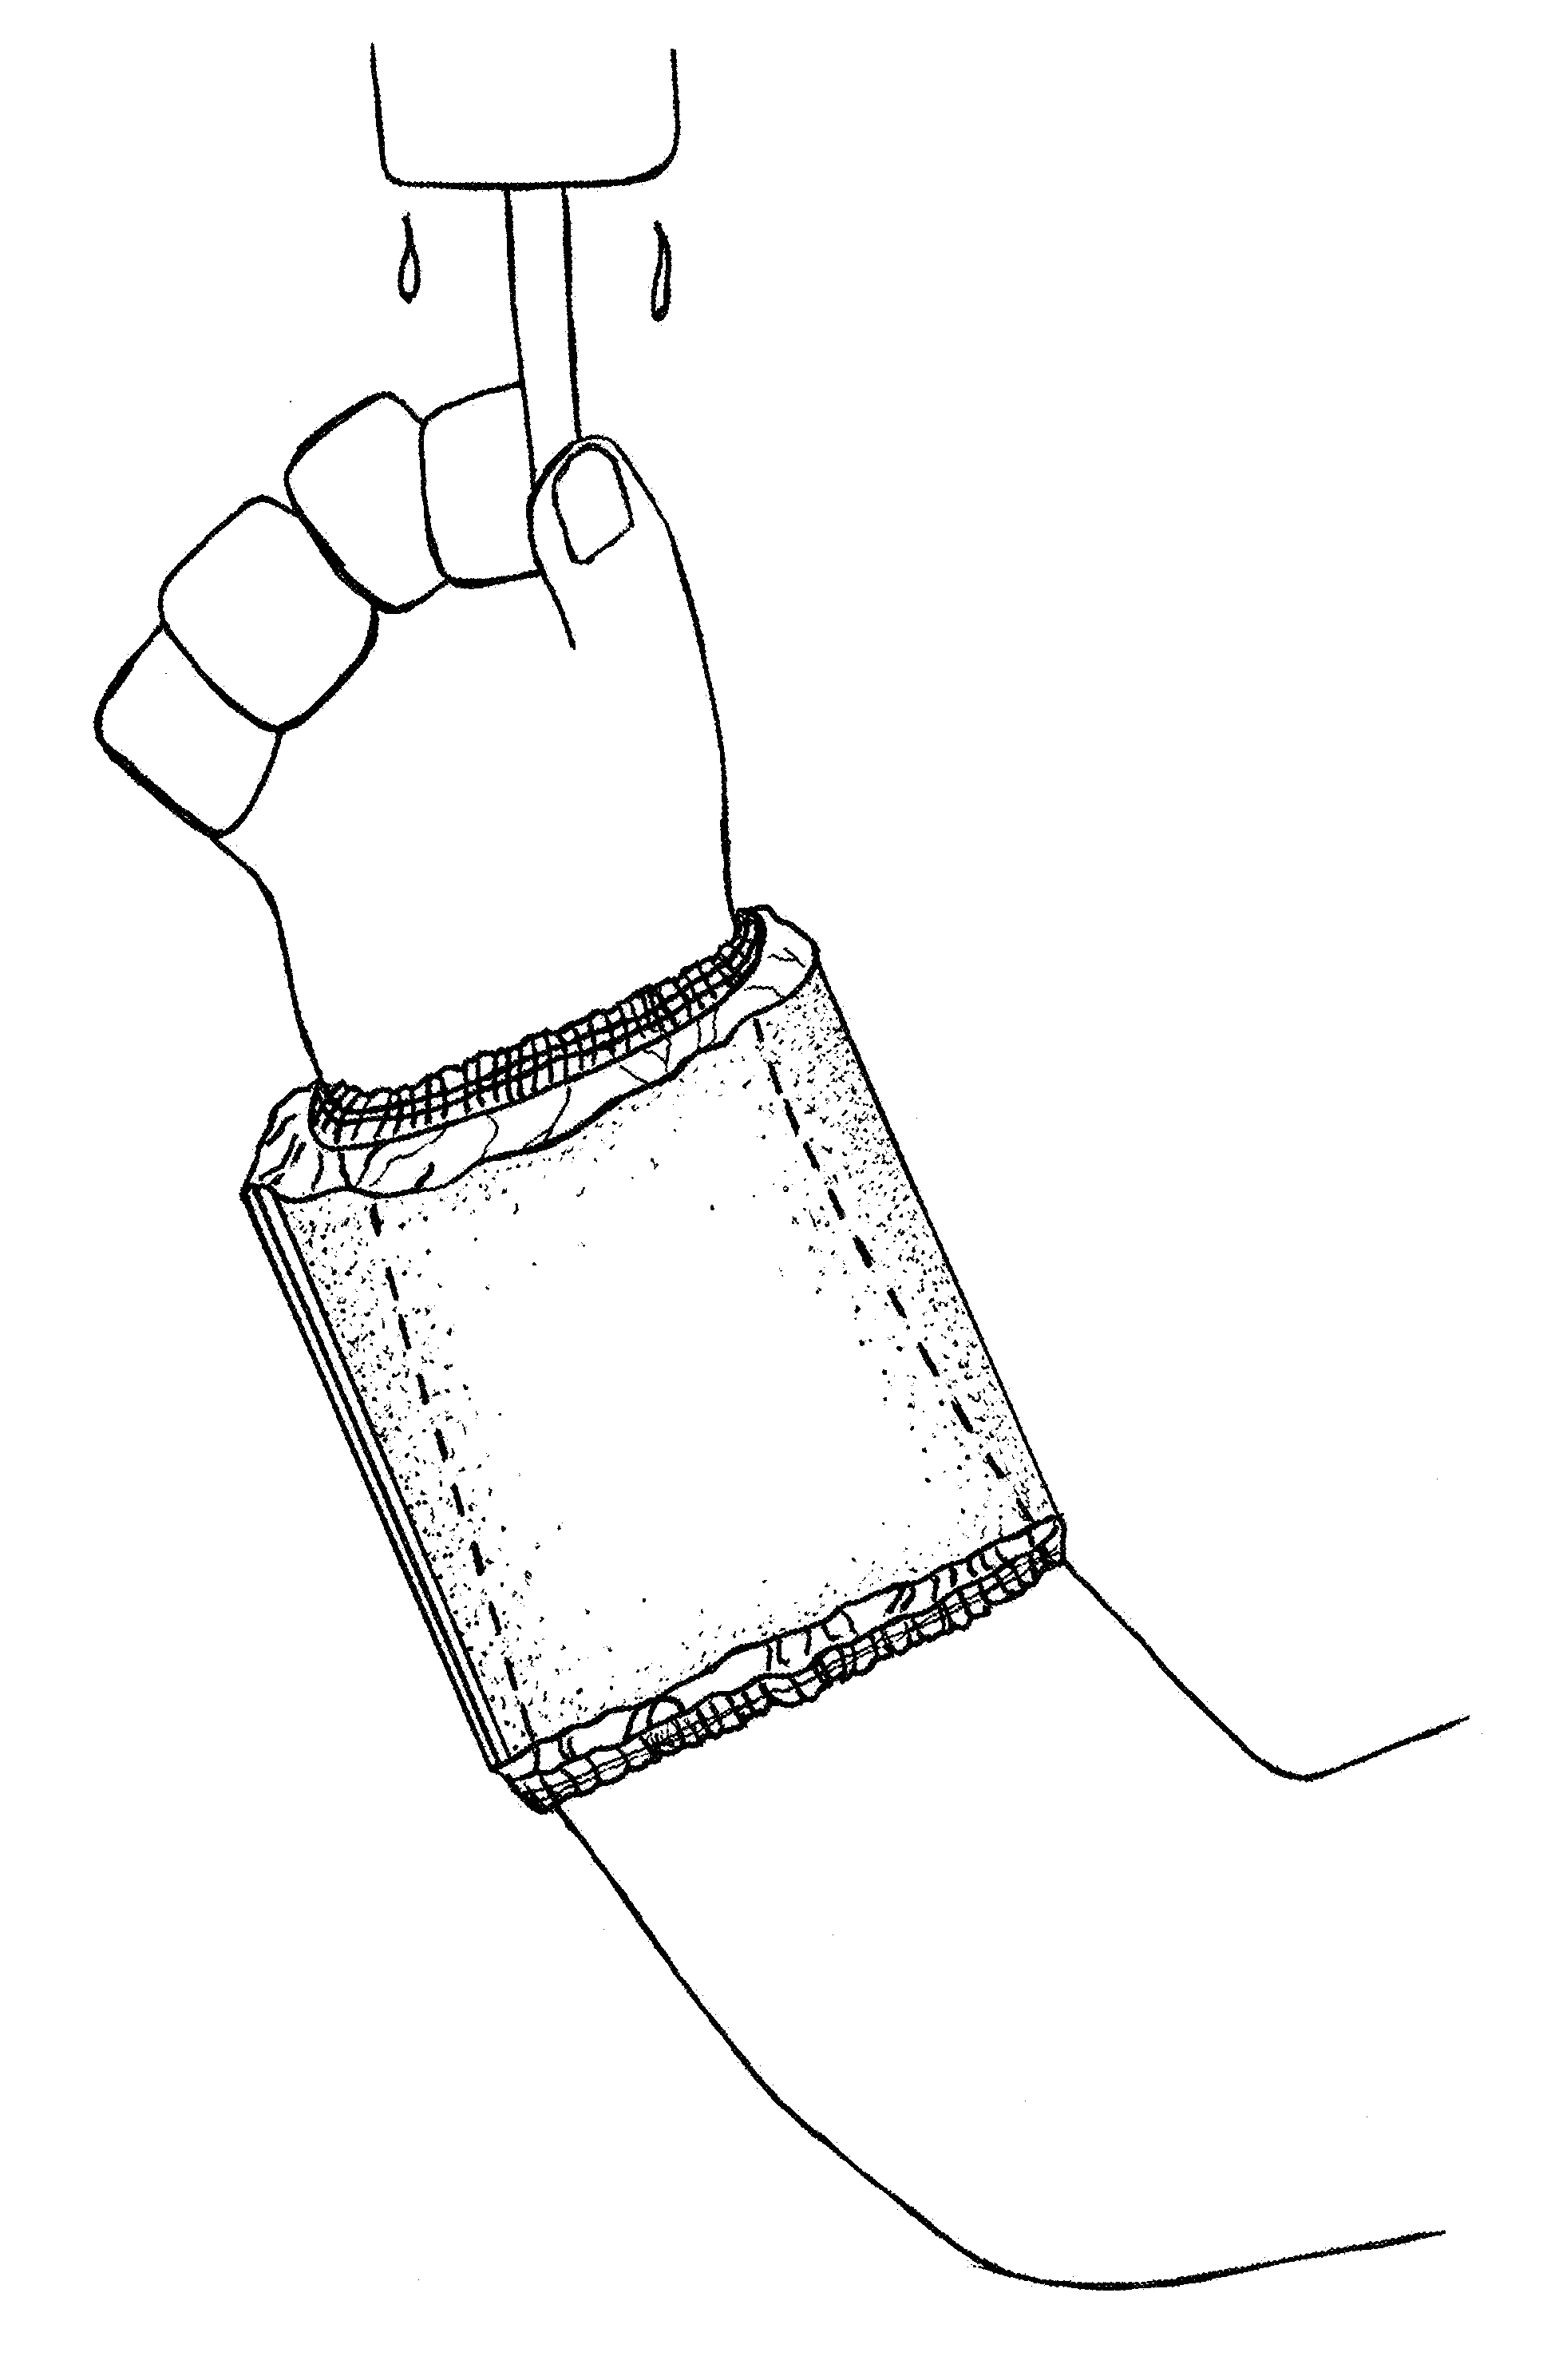 Disposable absorbent wrist band